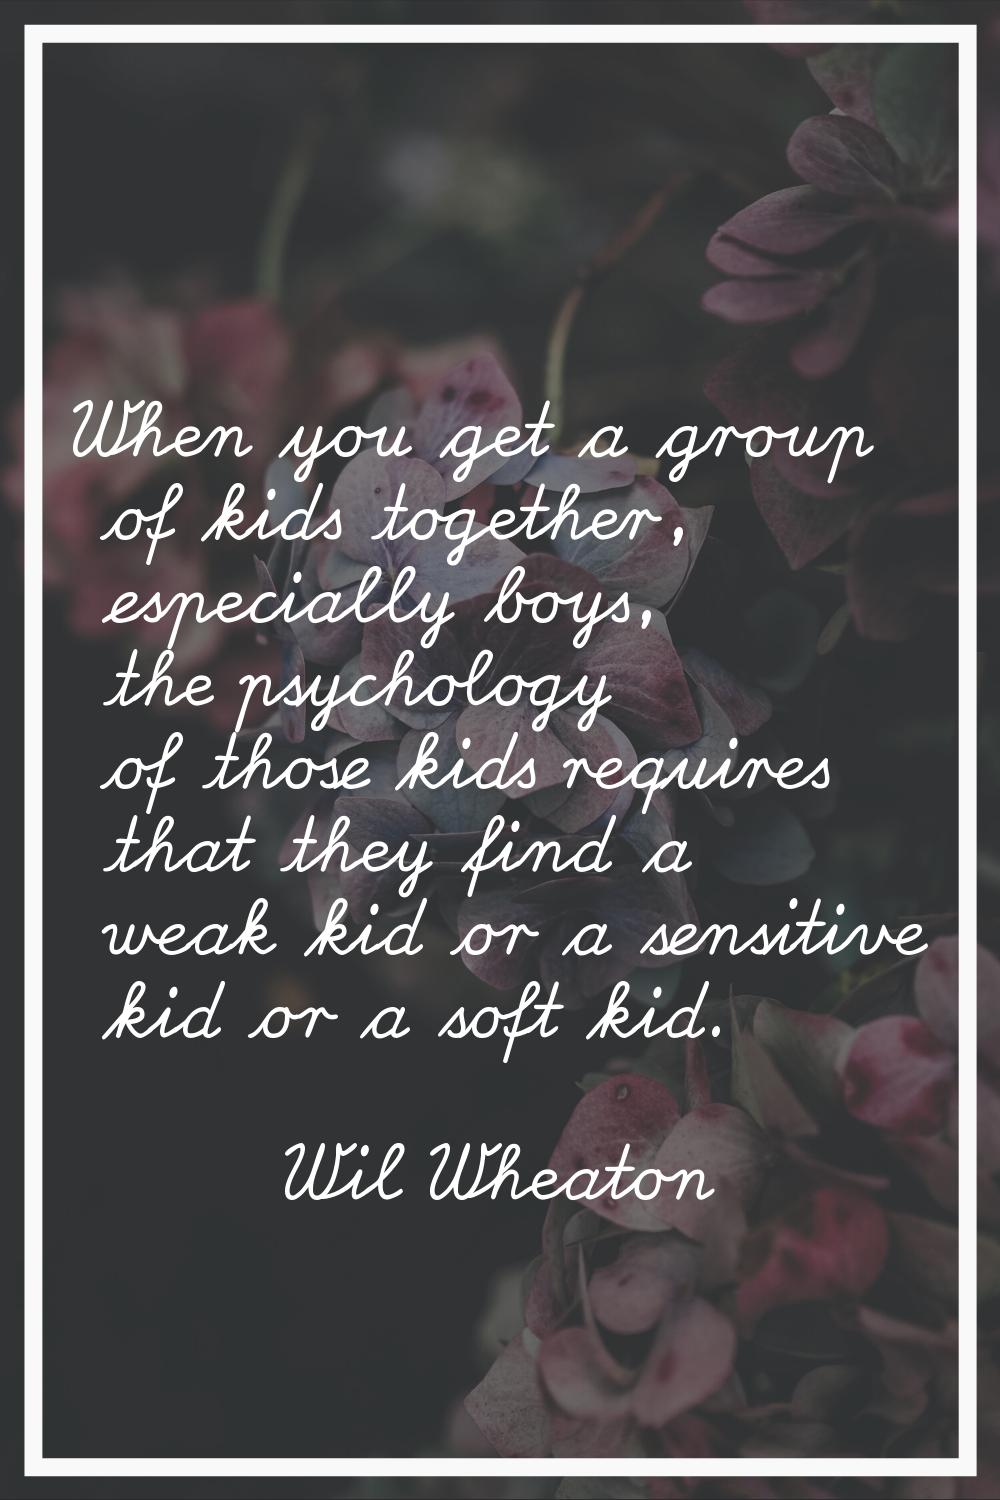 When you get a group of kids together, especially boys, the psychology of those kids requires that 